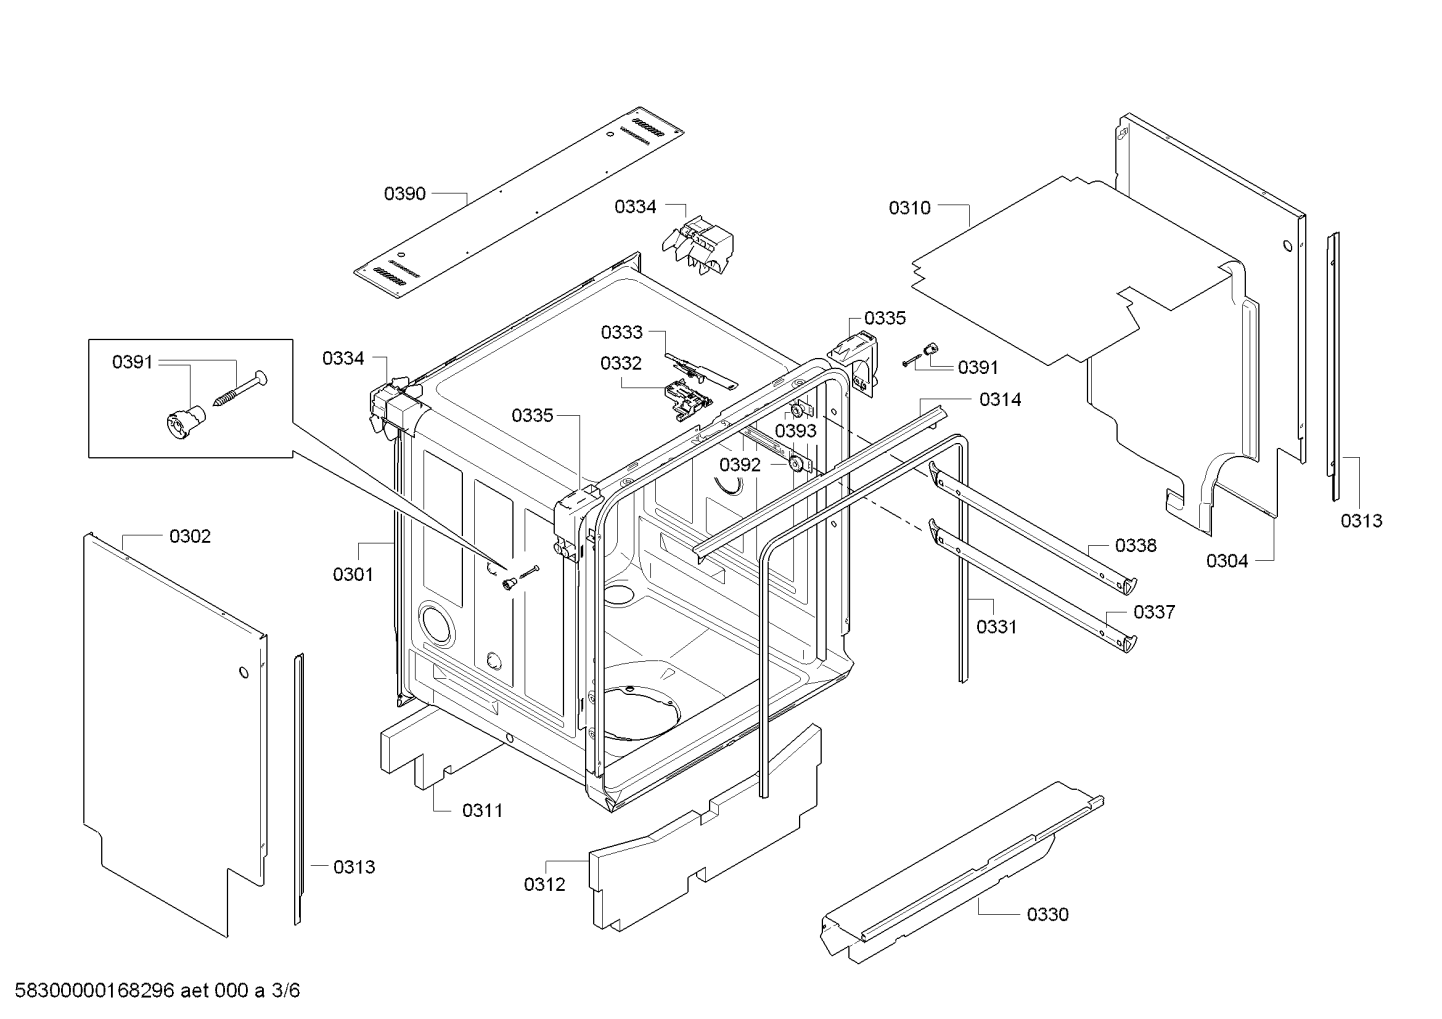 drawing_link_3_device_1713584